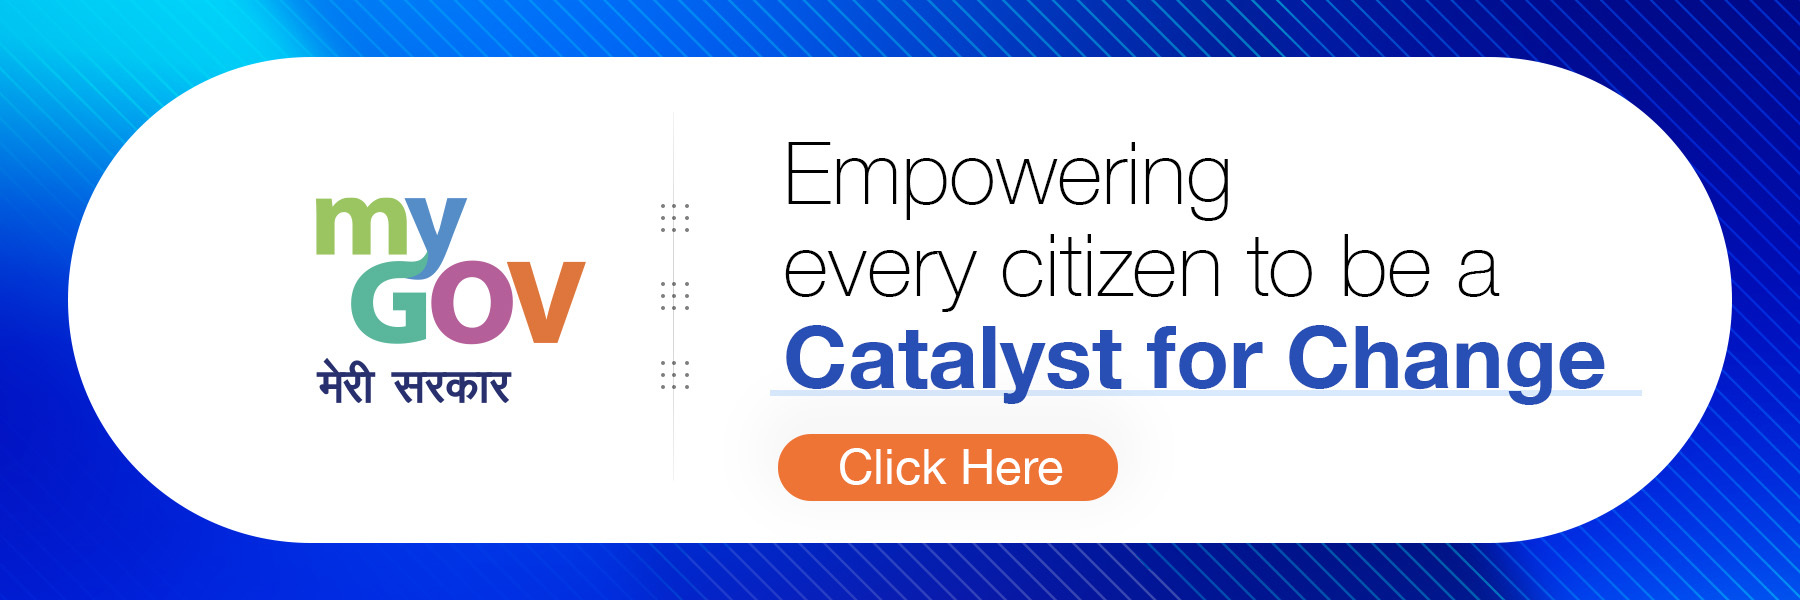 catalyst for change